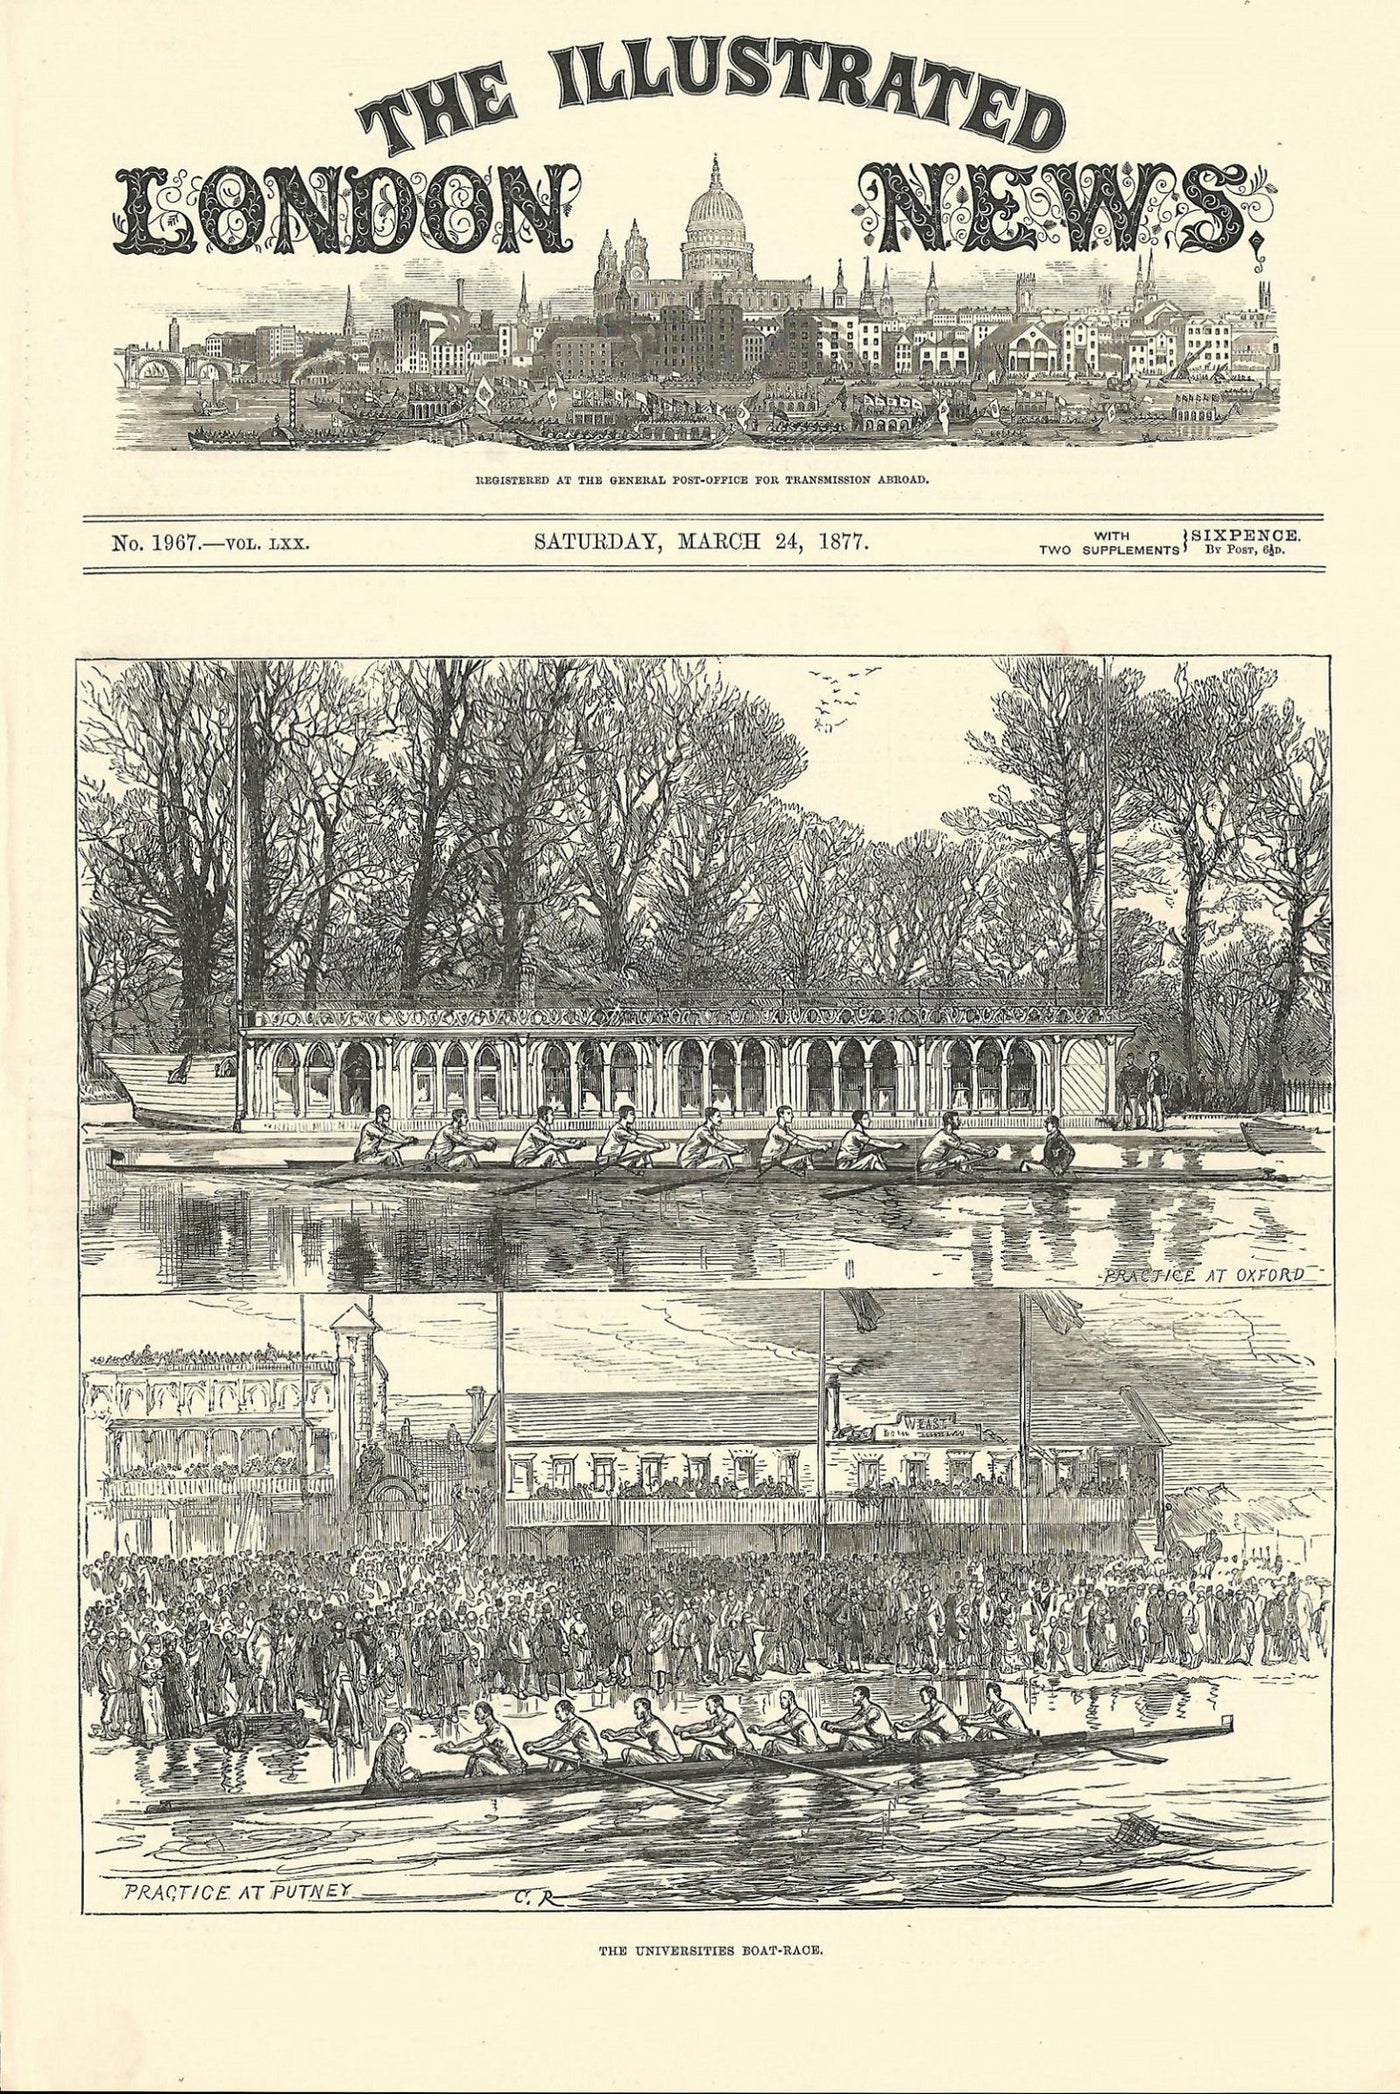 University Boat Race 1877 antique print dated March 1877